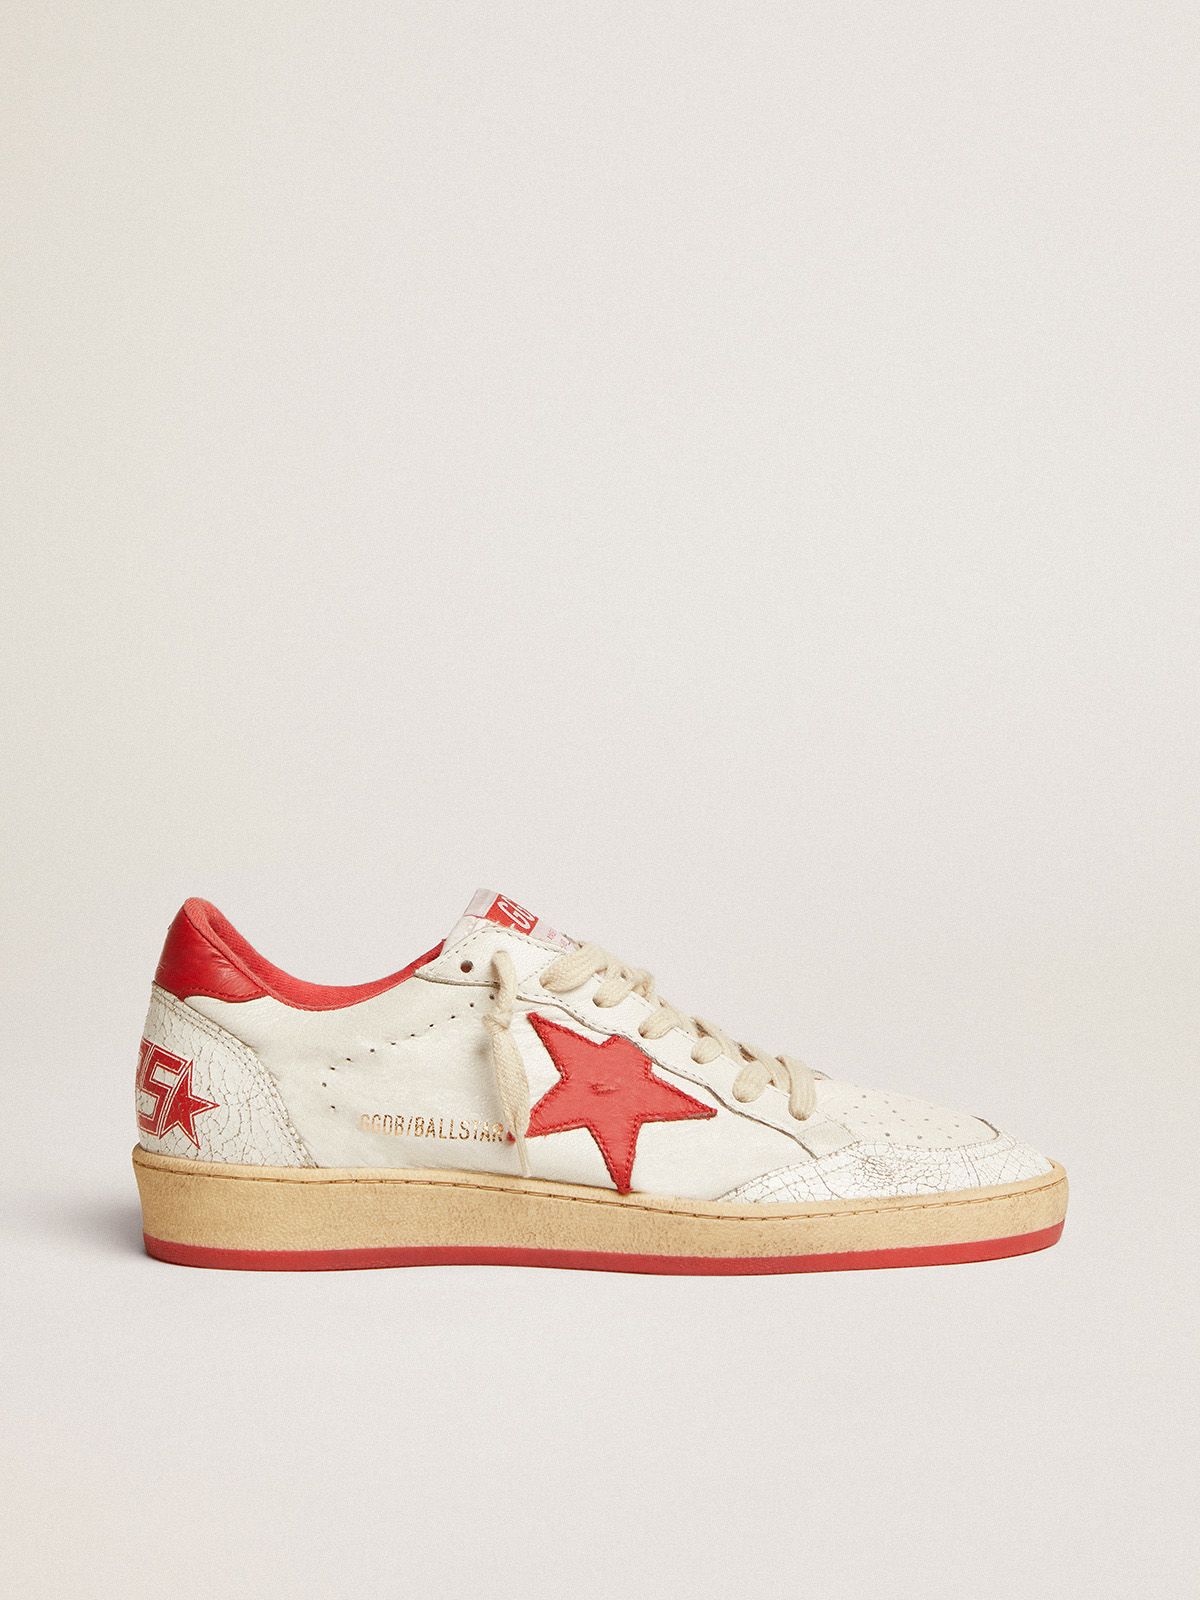 White Ball Star sneakers in leather with red star and heel tab | 